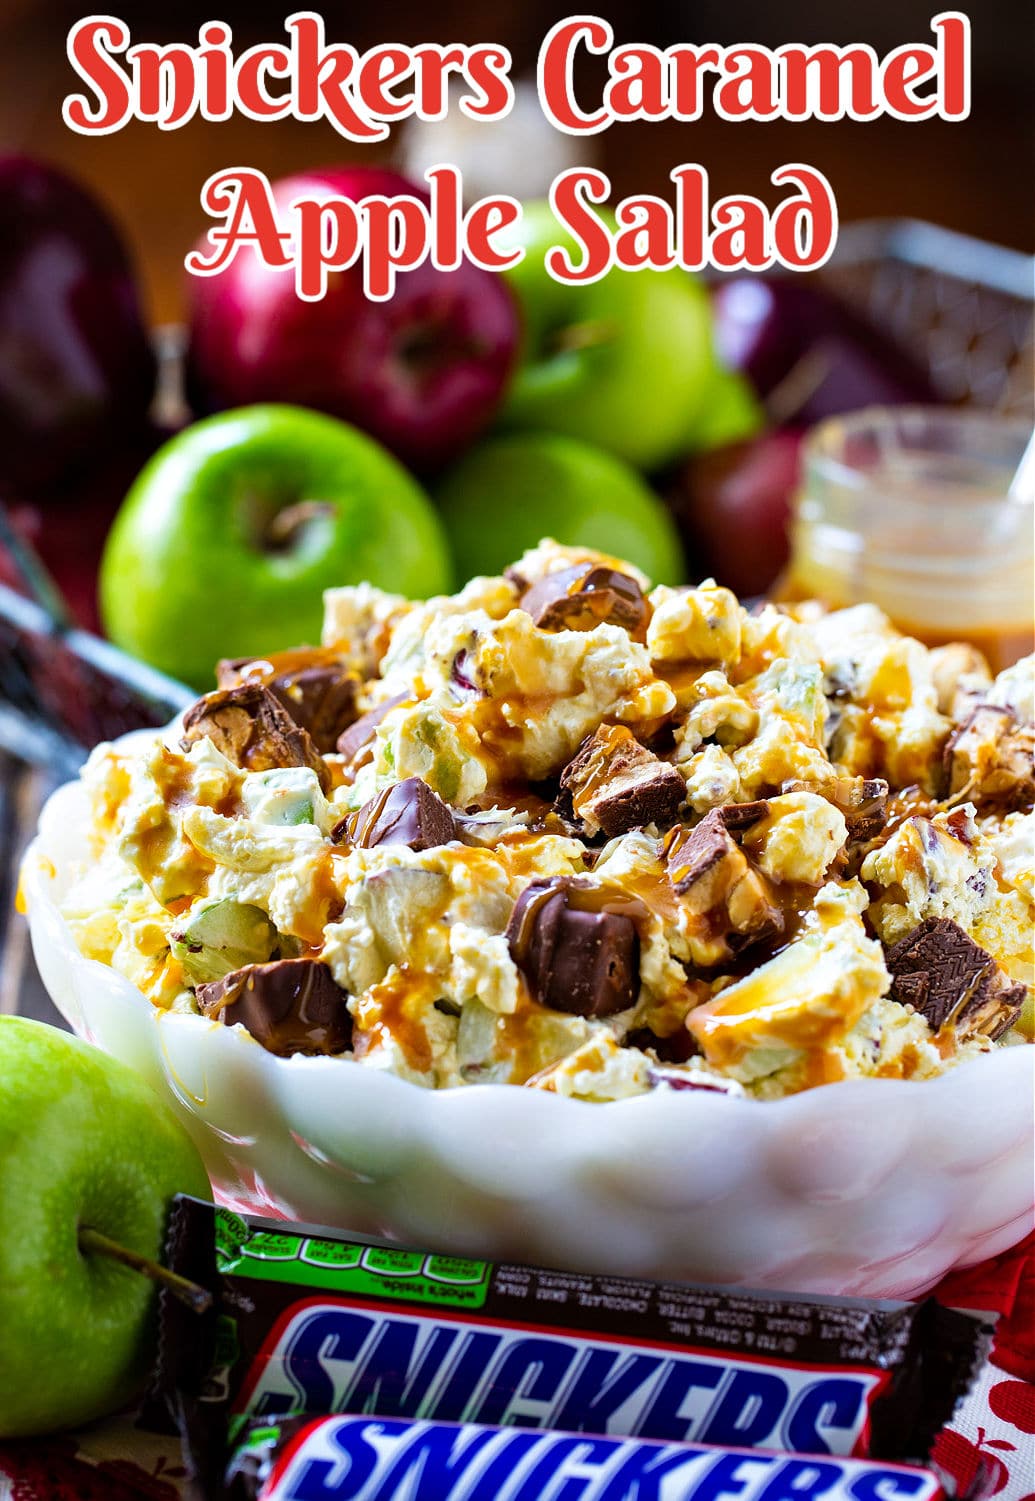 Snickers Caramel Apple Salad in white serving bowl.